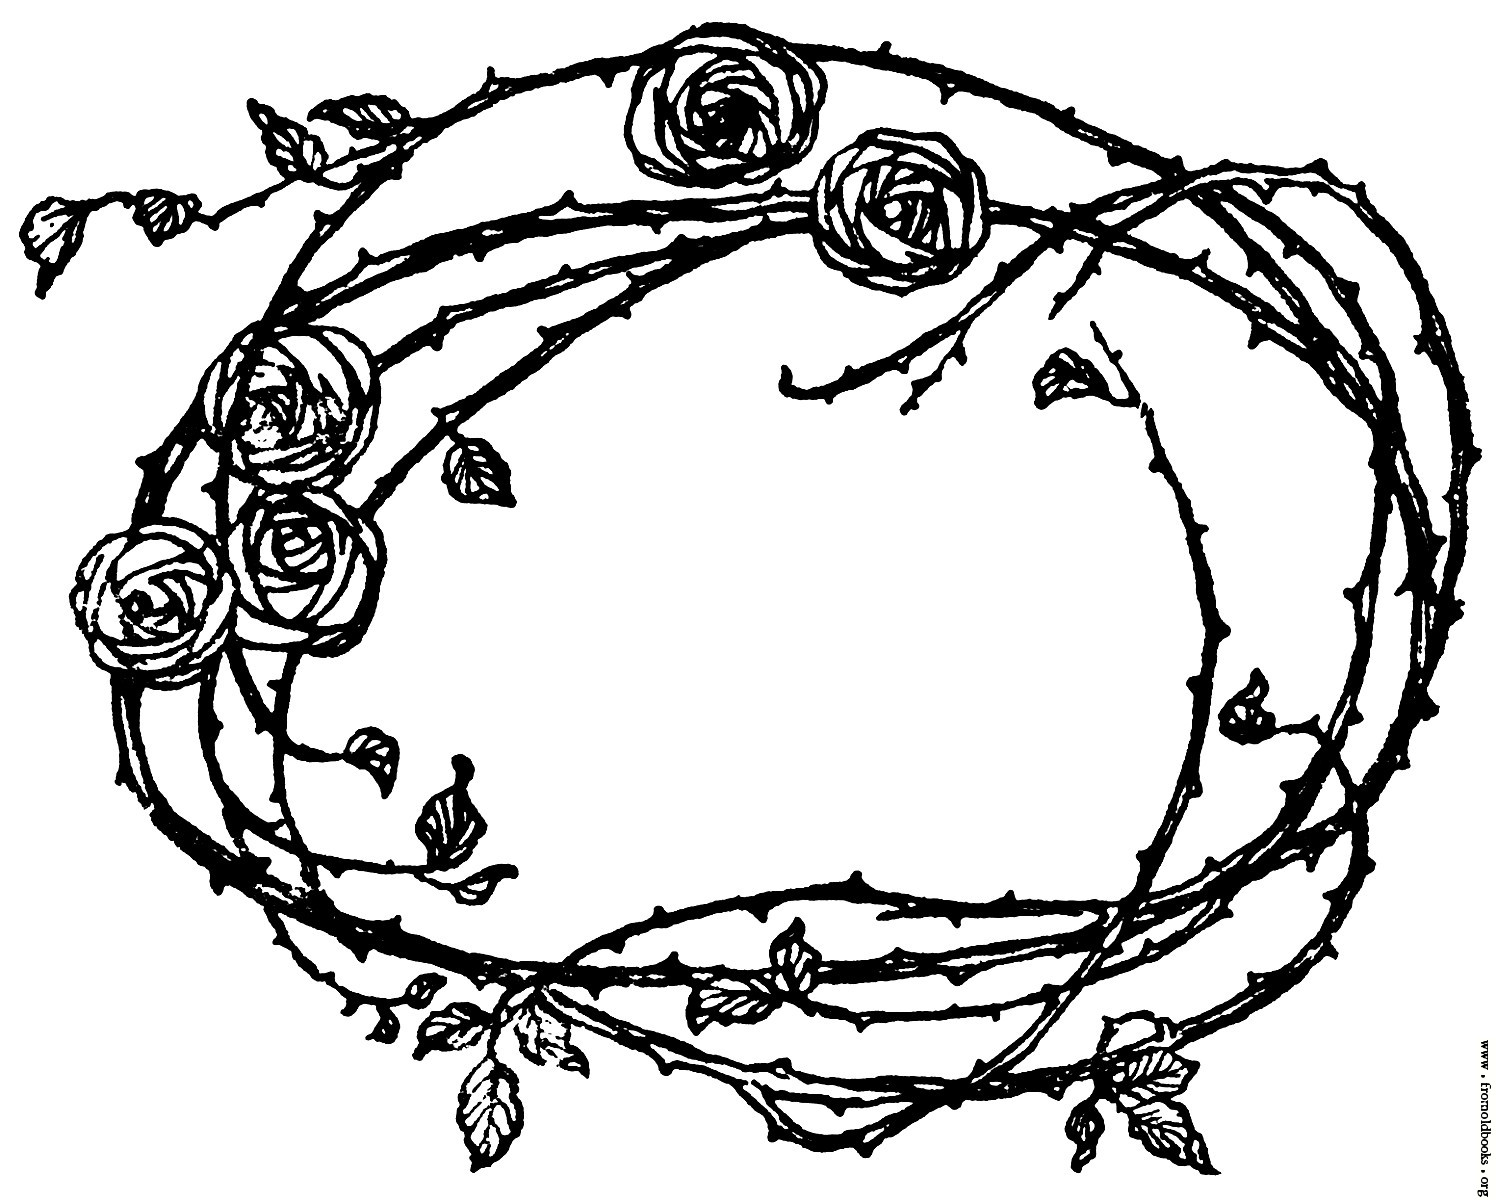 Border Of Roses And Thorns Details